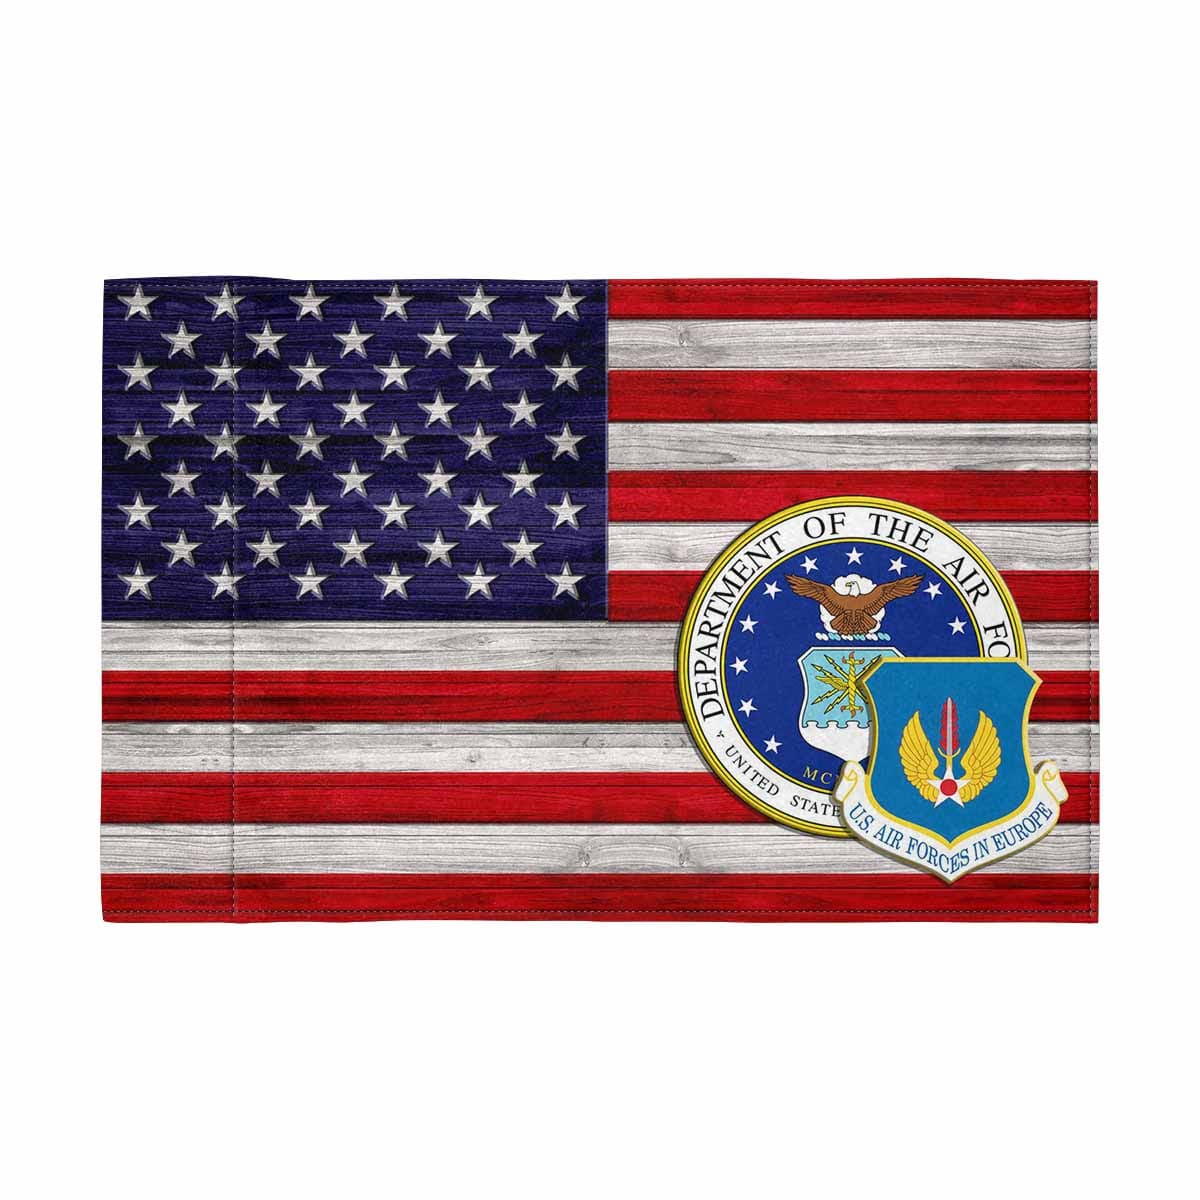 US Air Force in Europe Motorcycle Flag 9" x 6" Twin-Side Printing D02-MotorcycleFlag-USAF-Veterans Nation